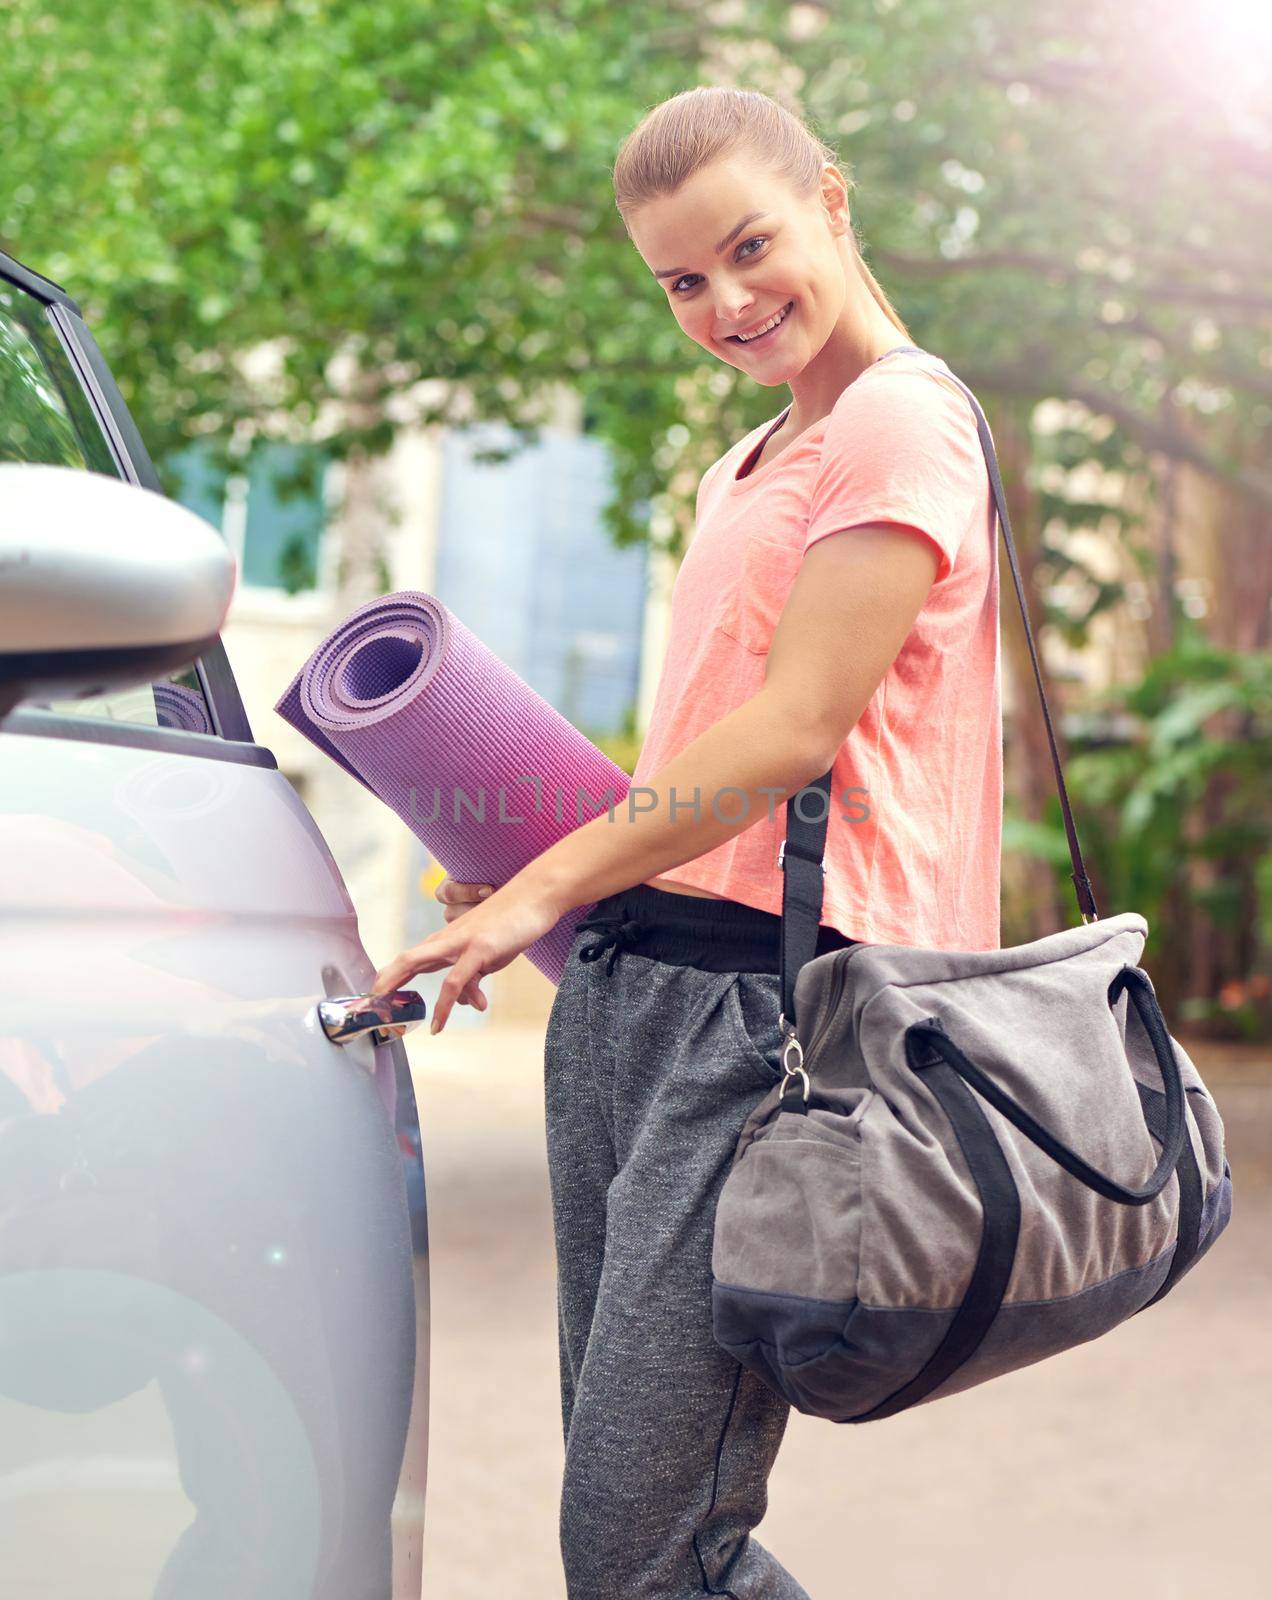 Yoga keeps me healthy and happy. a beautiful young woman carrying a yoga mat while getting into her car